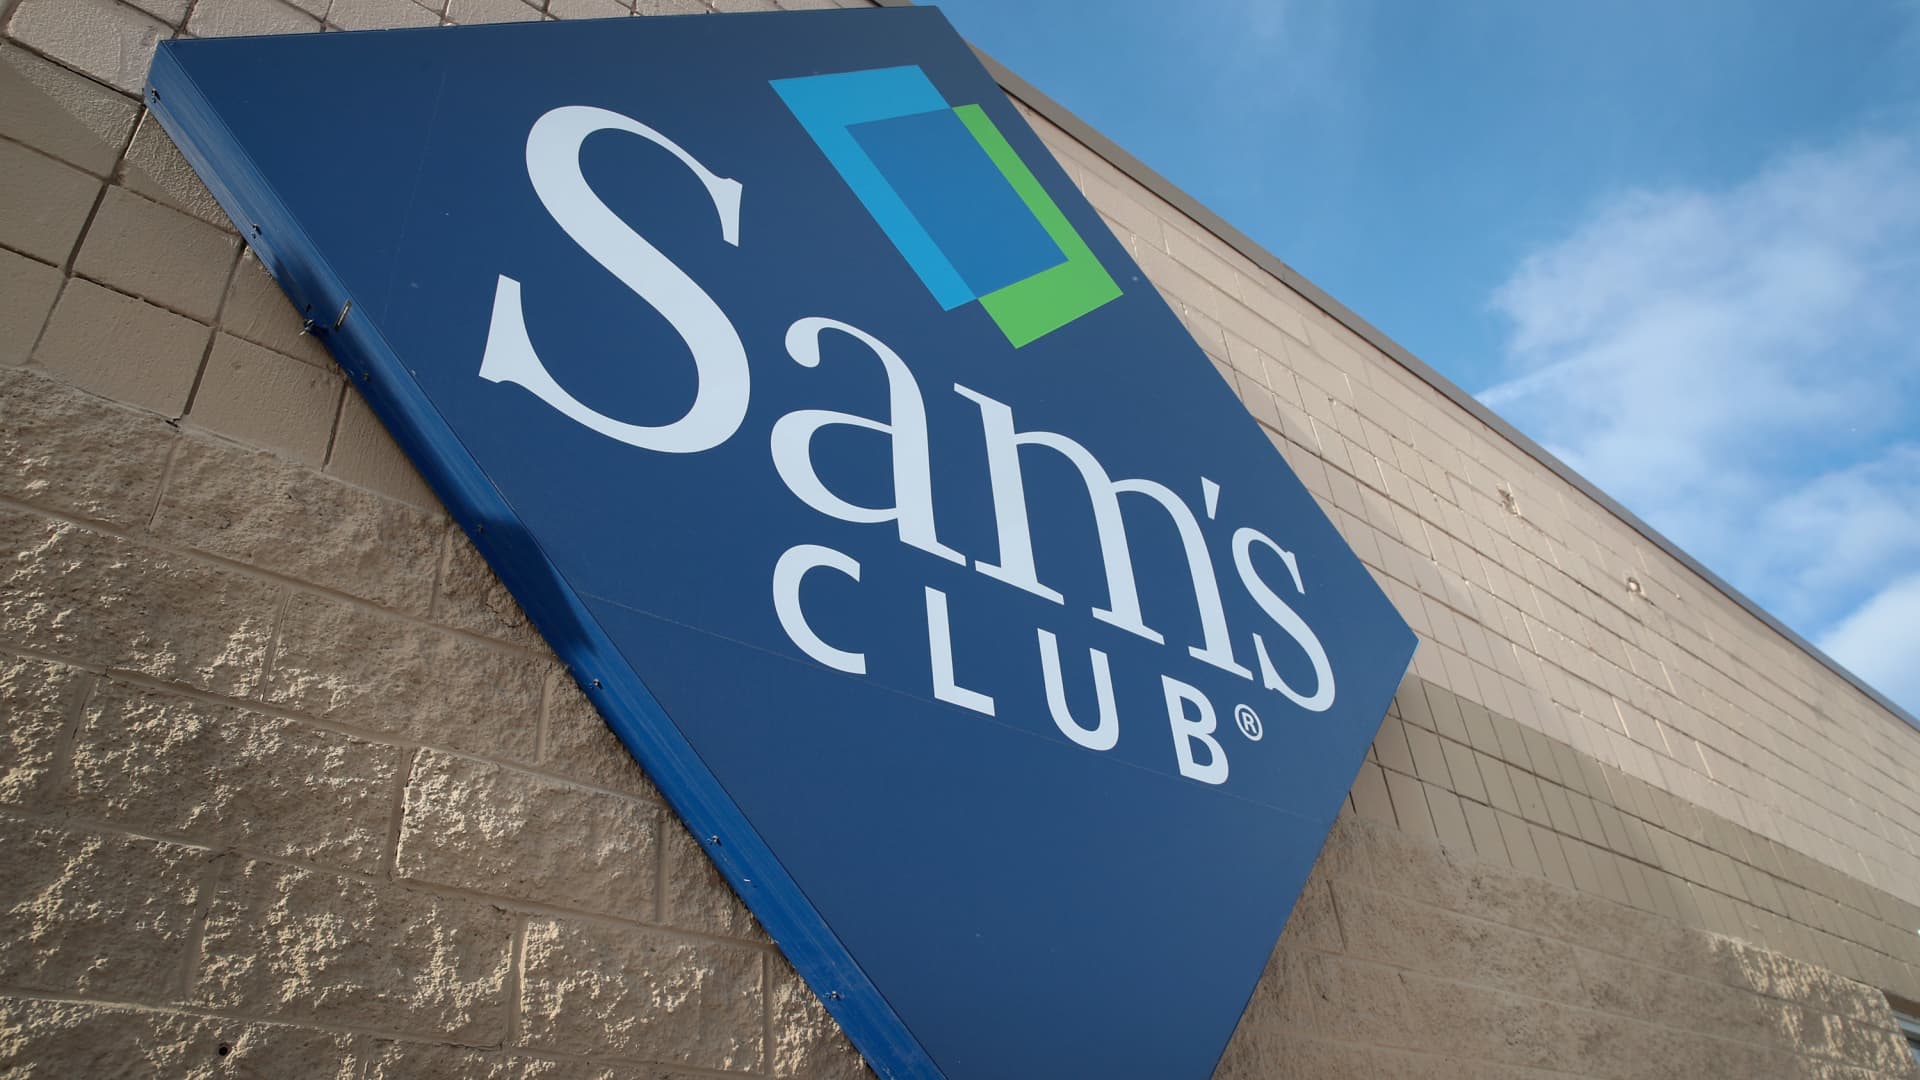 Walmart-owned Sam’s Club is raising annual membership fees for the first time in 9 years